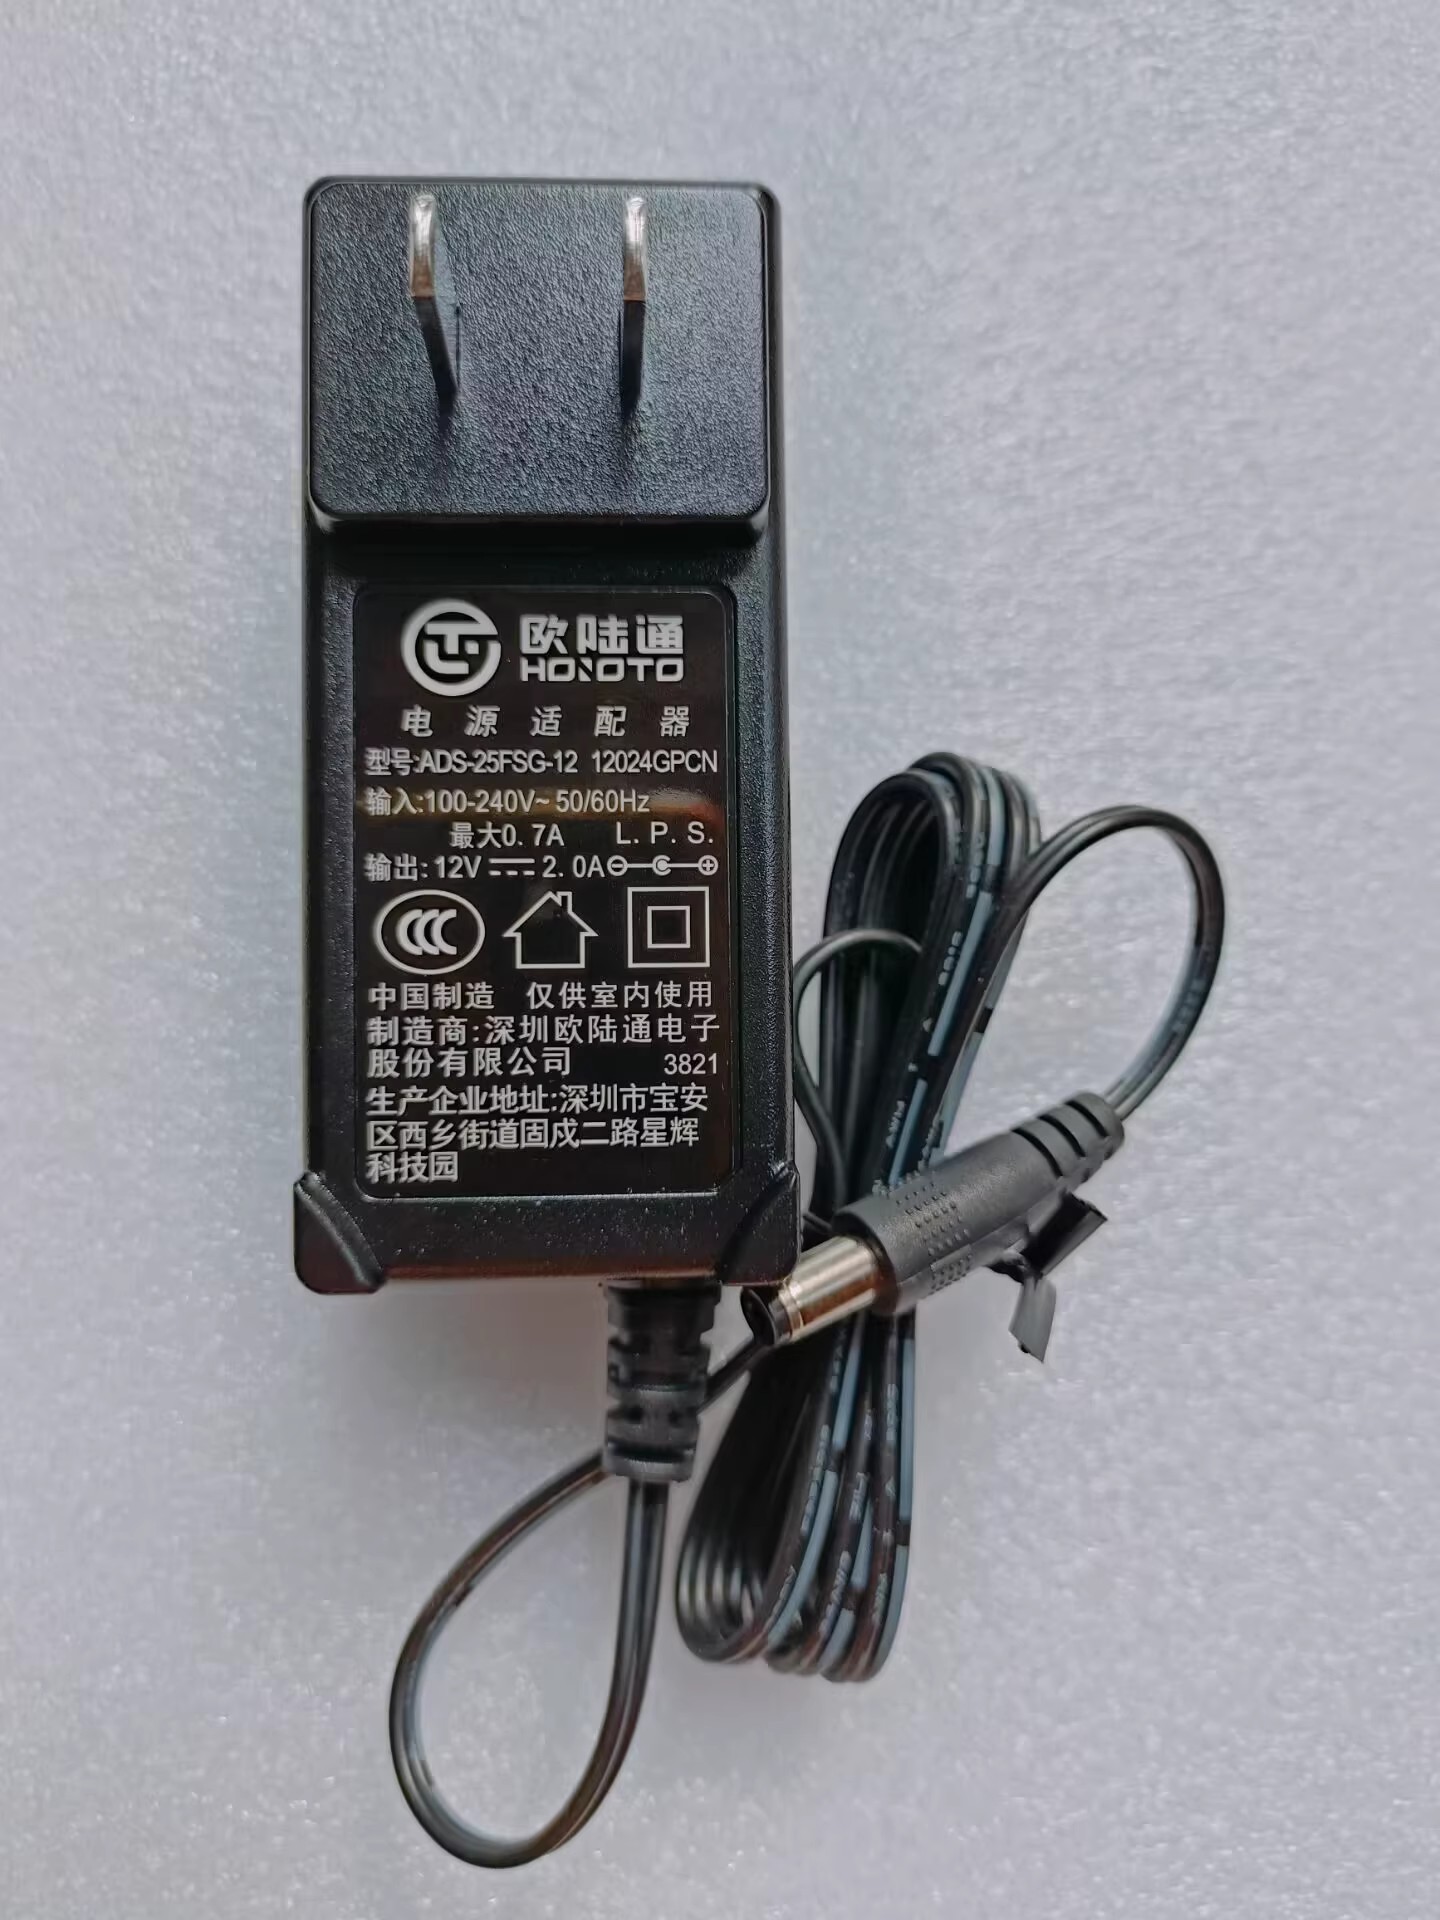 *Brand NEW* KW300-120L15 12V 1.5A AC DC ADAPTHE POWER Supply